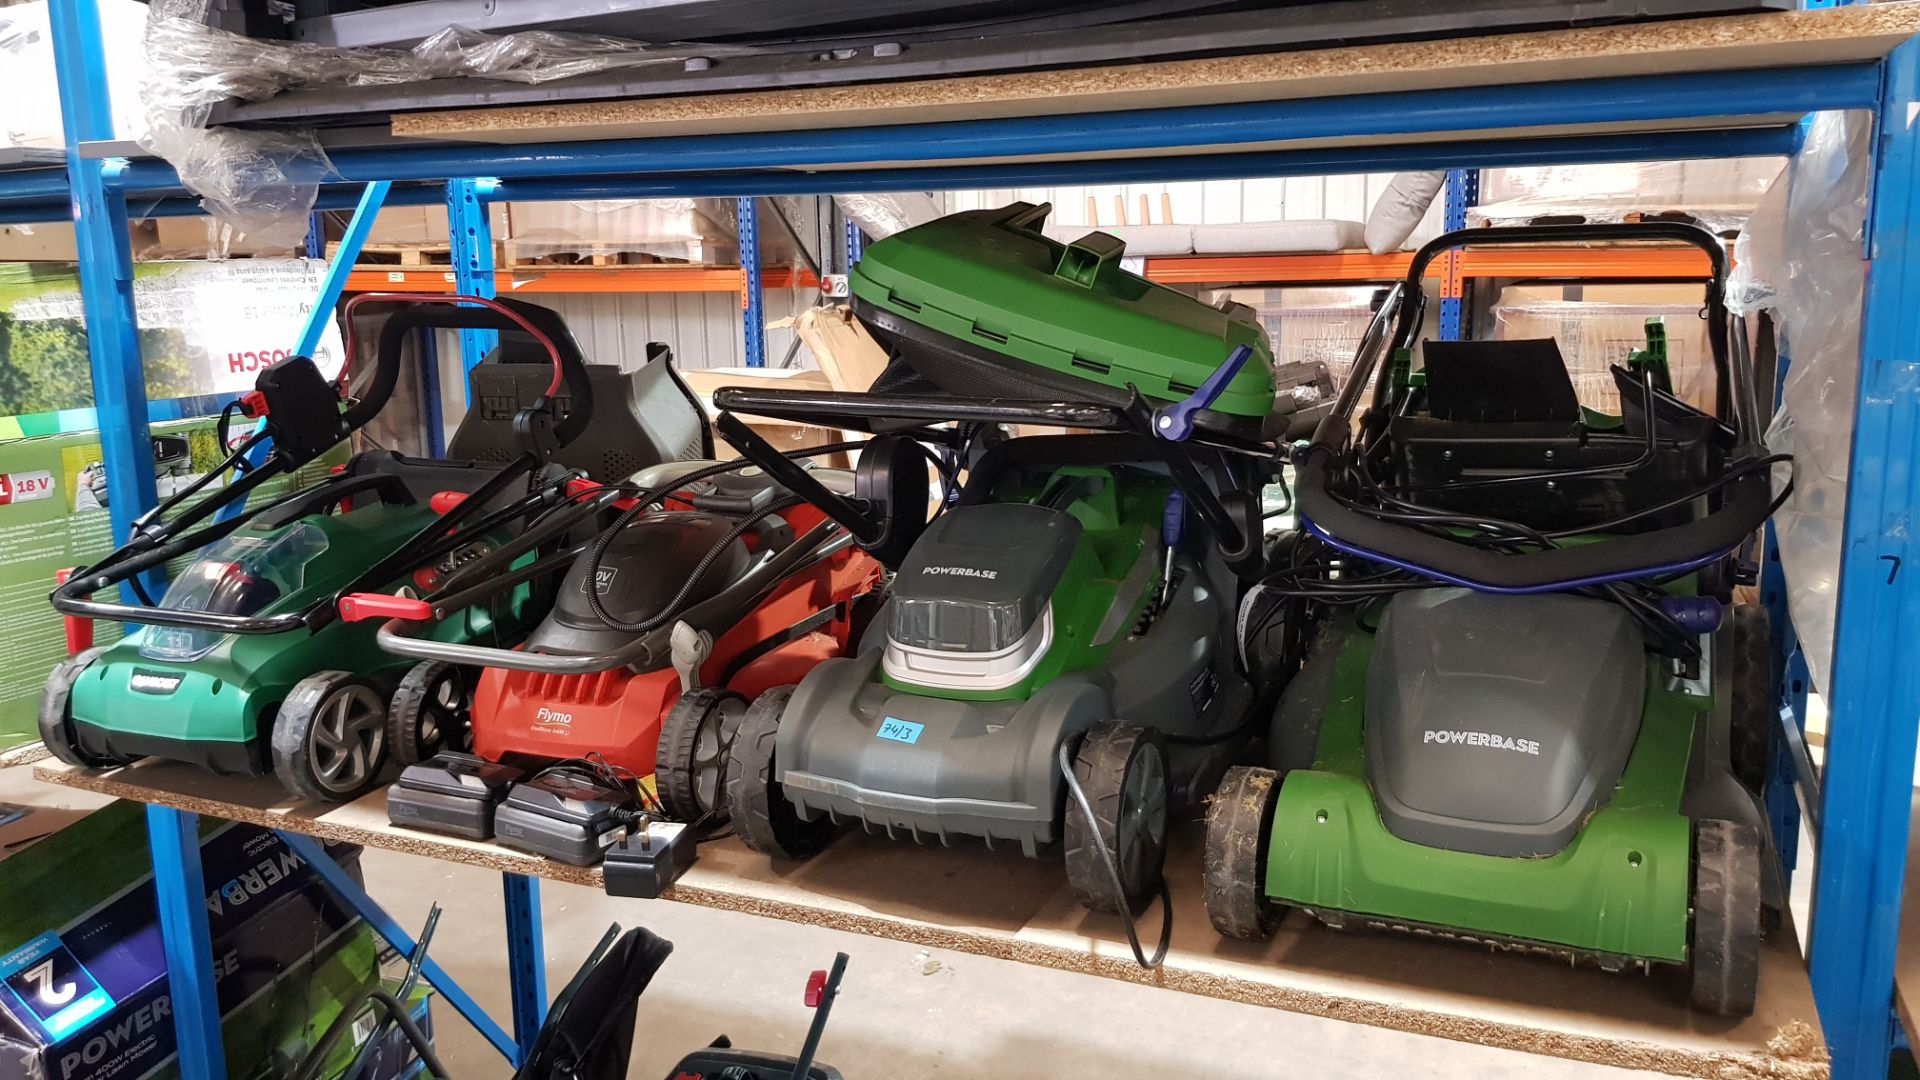 (10CD) Trader’s Lot – Contents Of 3 Bays. 13x Mixed Lawn Mowers. To Include Powerbase, Flymo, Qualc - Image 11 of 11